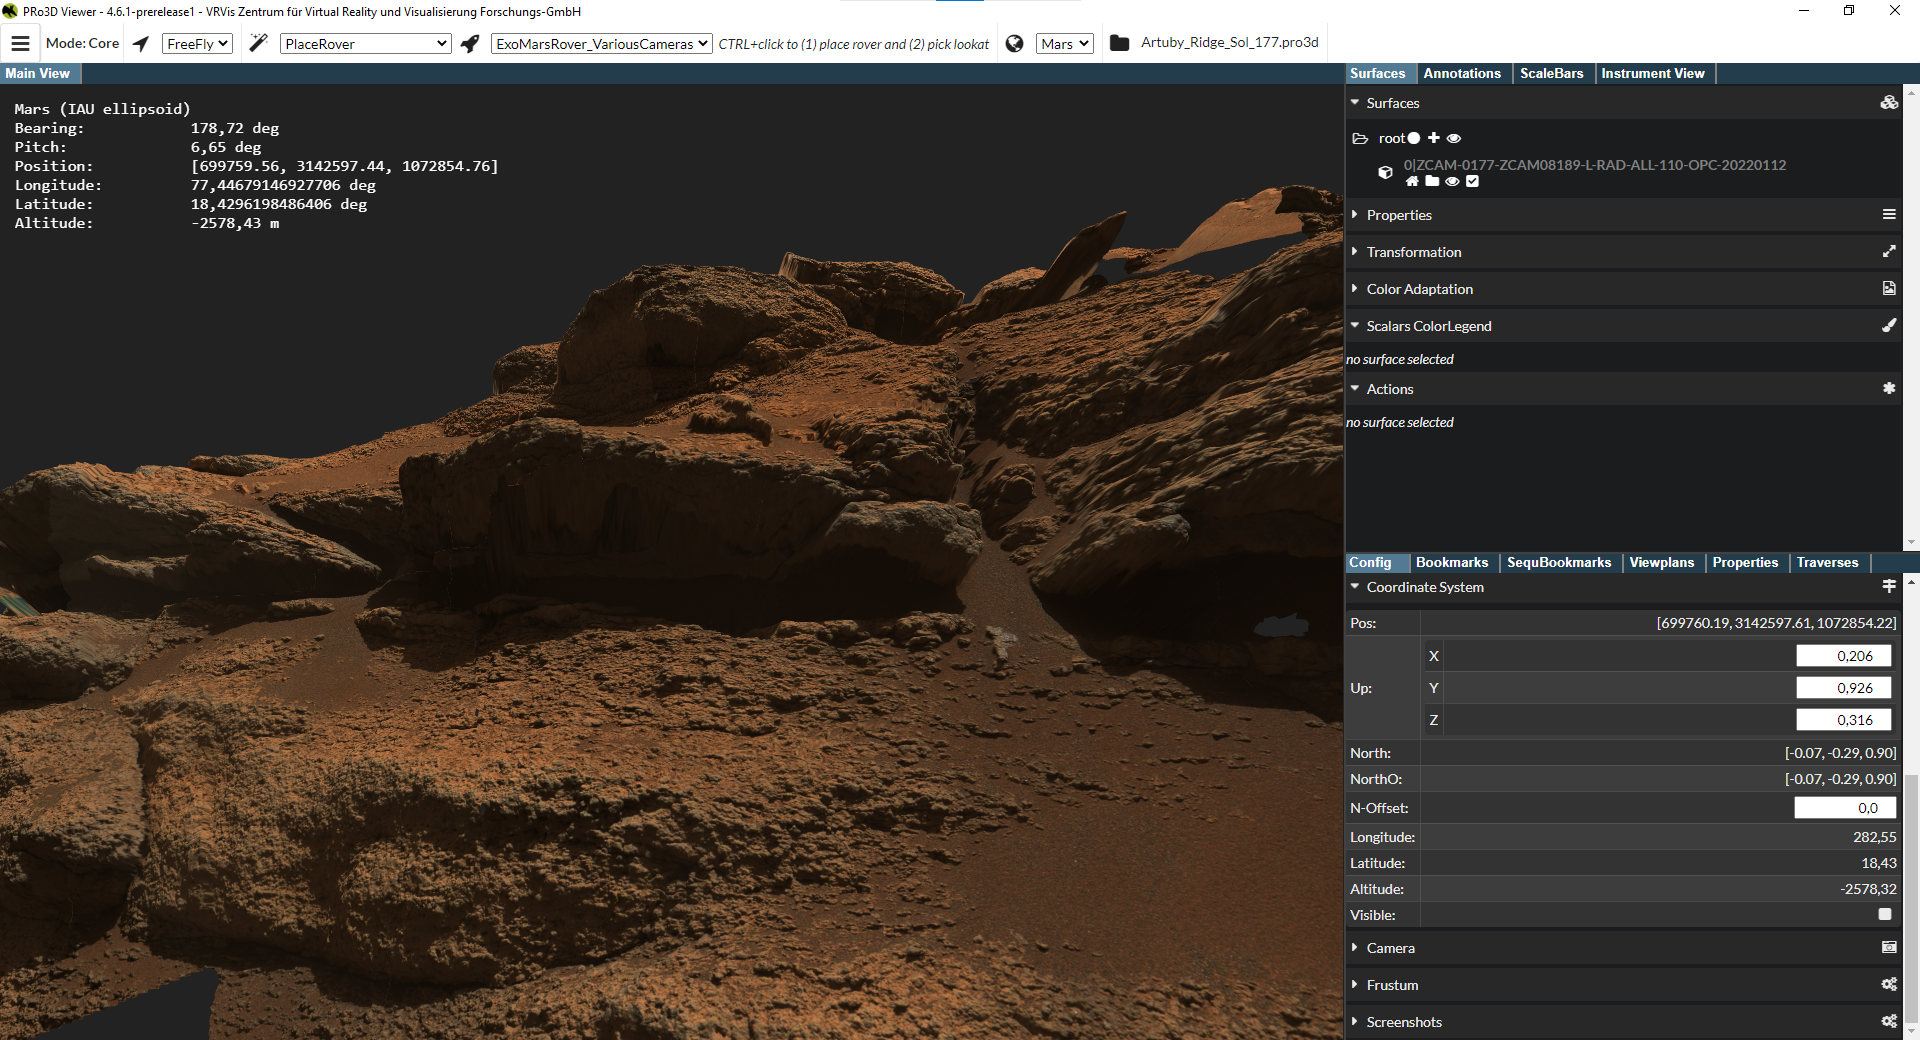 Screenshot of a section of the 3D Mars surface